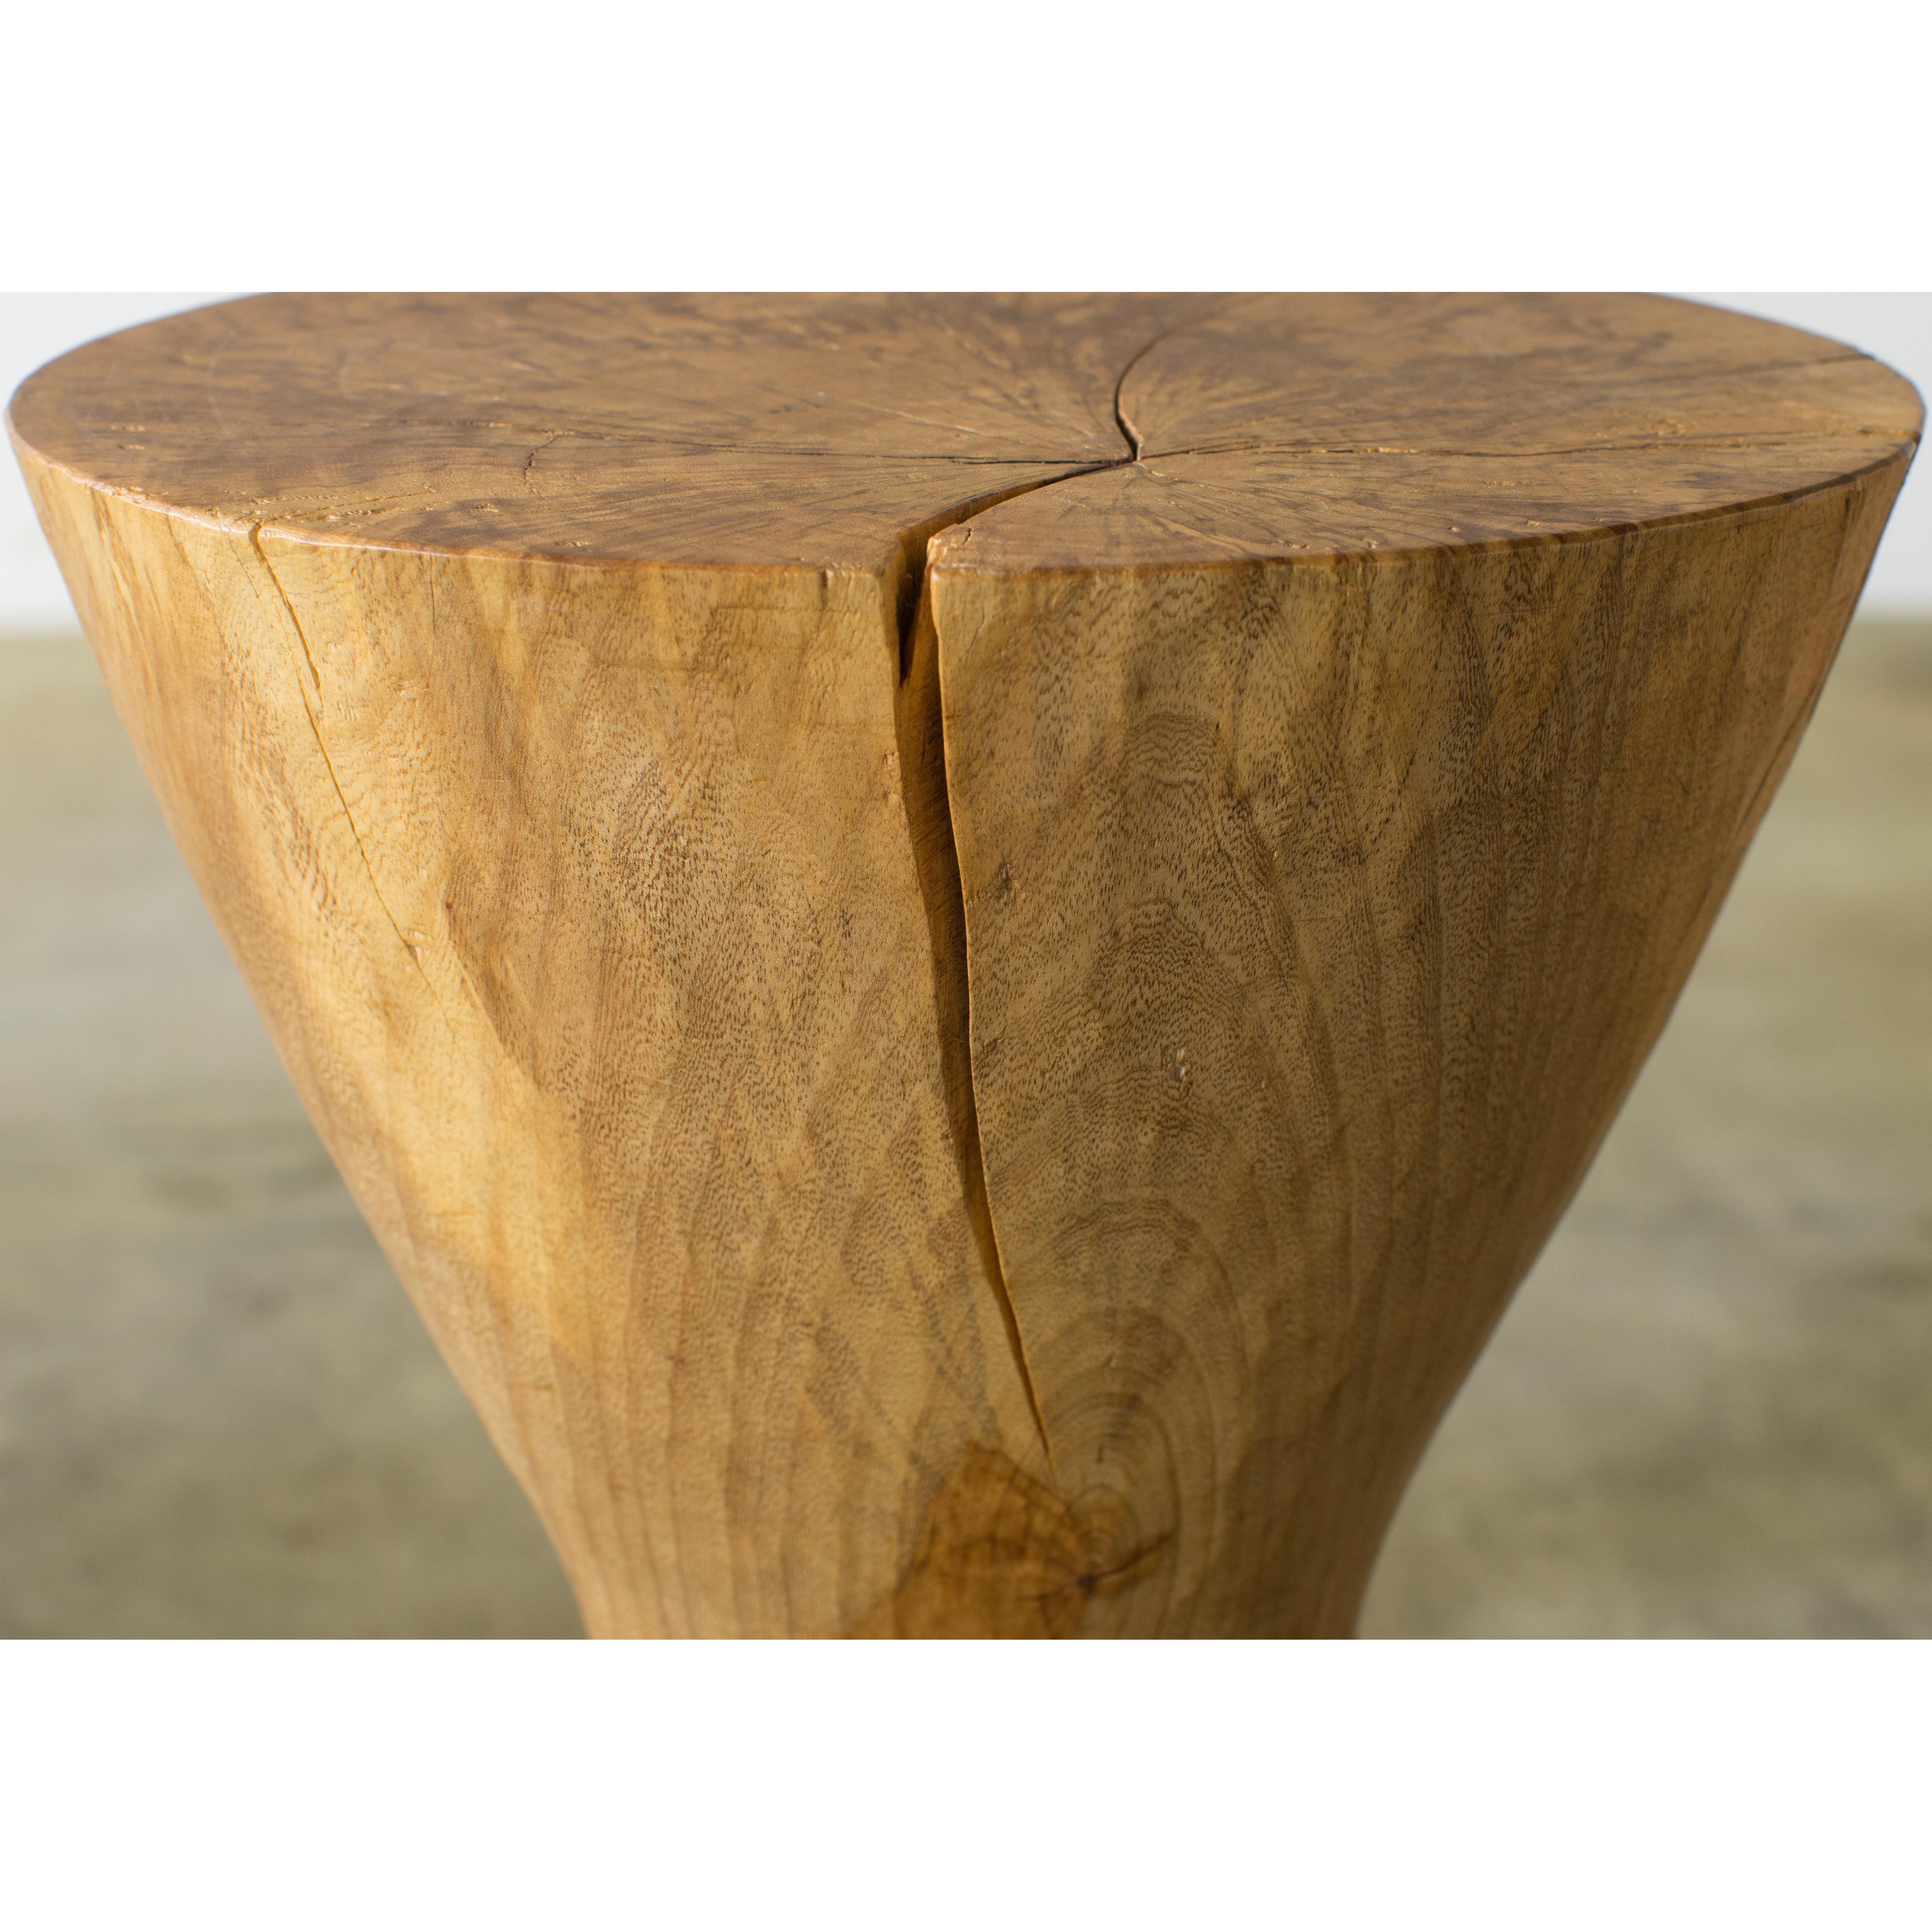 Contemporary Hiroyuki Nishimura and Zogei Furniture Sculptural Stool17 Tribal Glamping For Sale